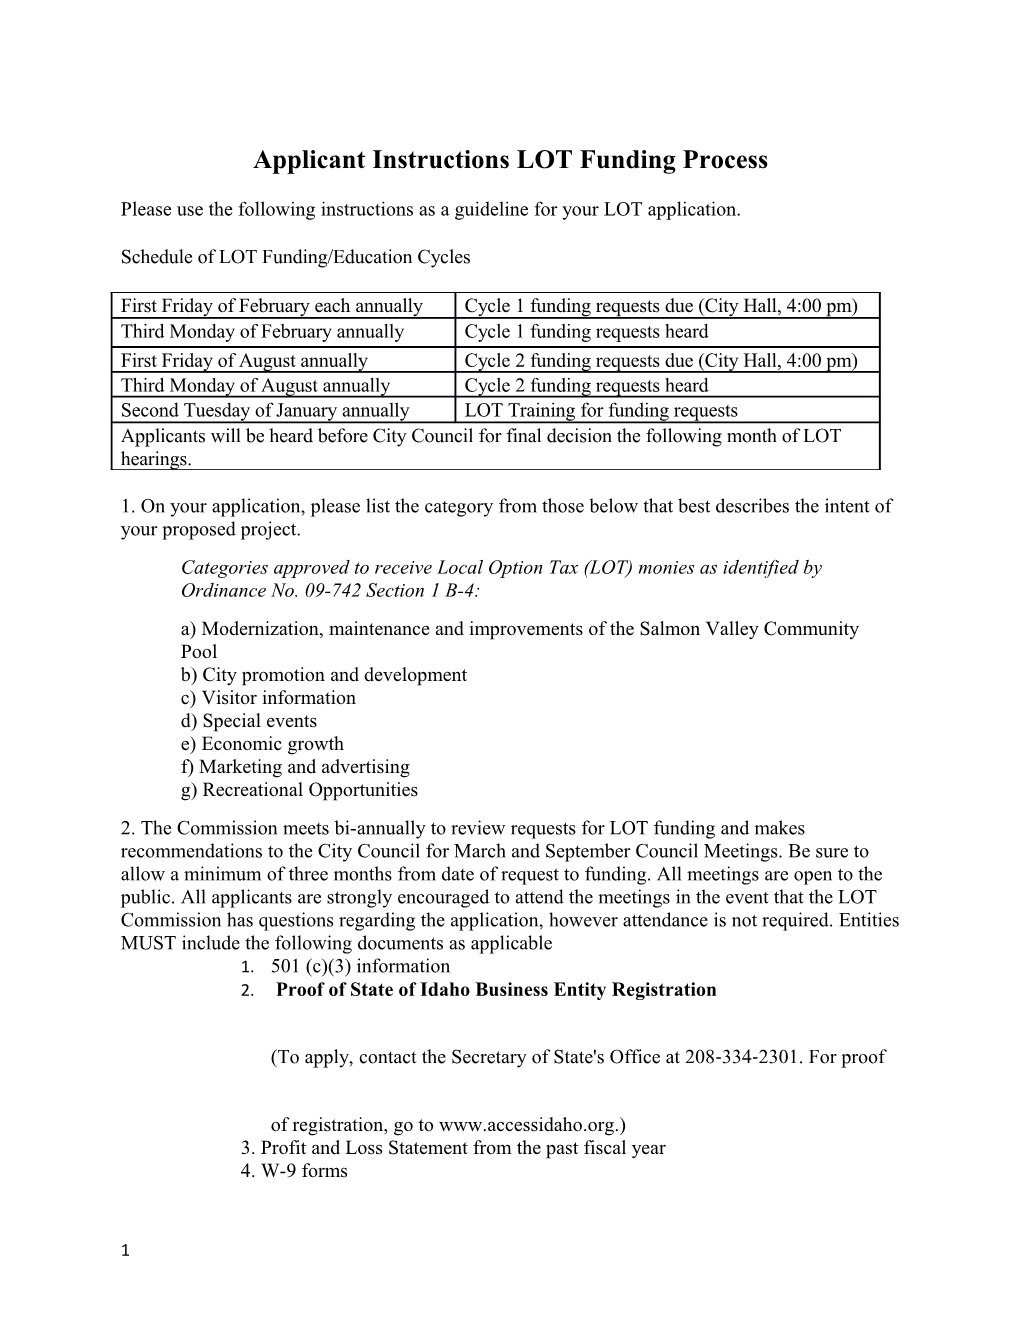 Applicant Instructions LOT Funding Process